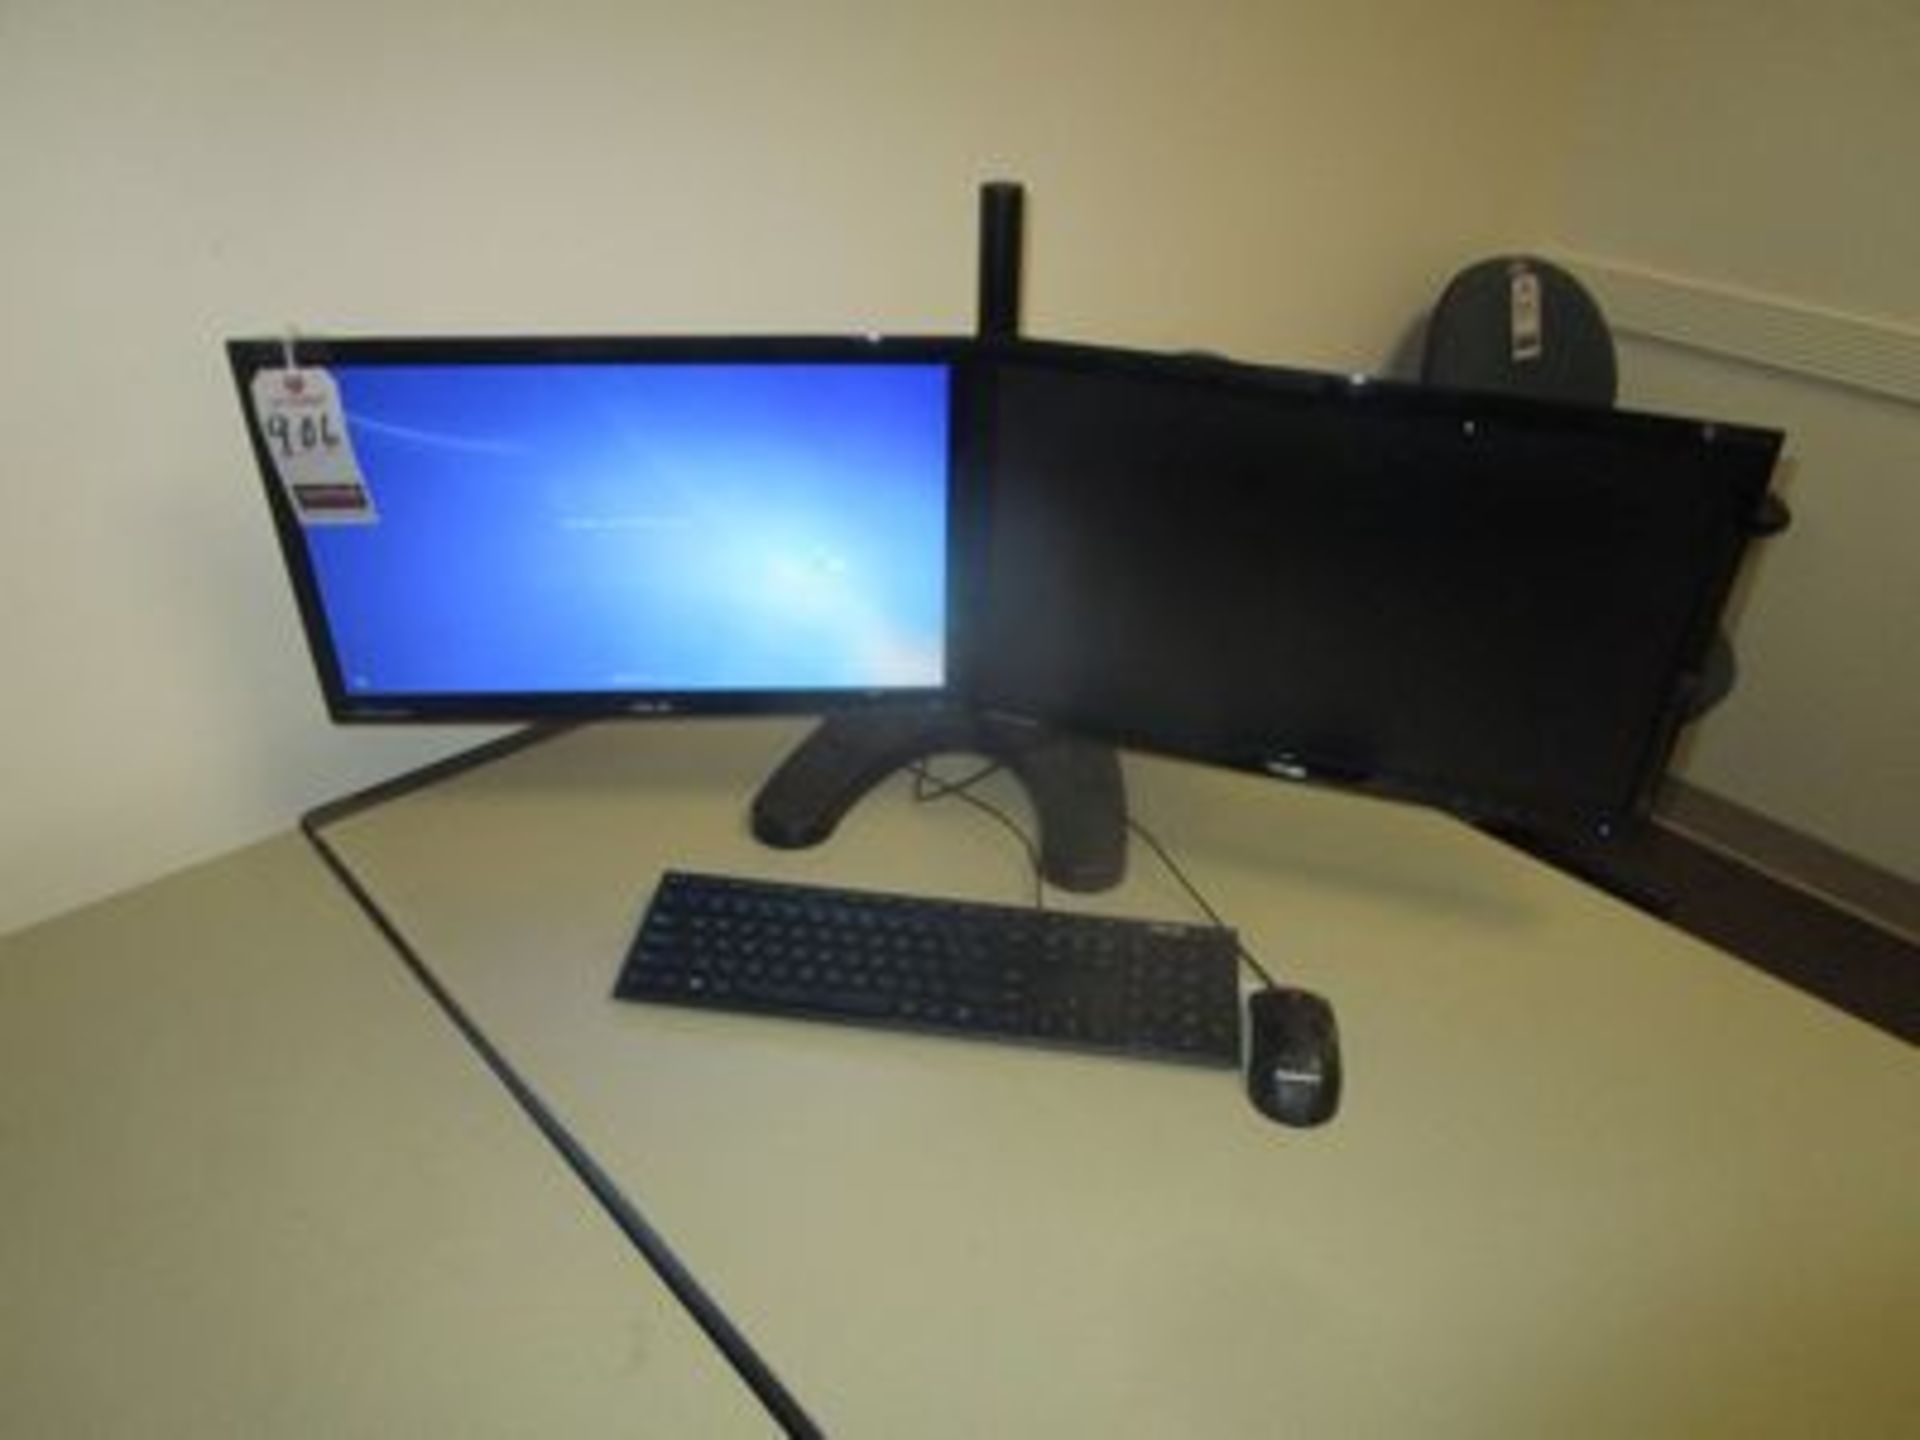 ASUS 21" FLAT MONITOR W/ DUAL MONITOR STAND